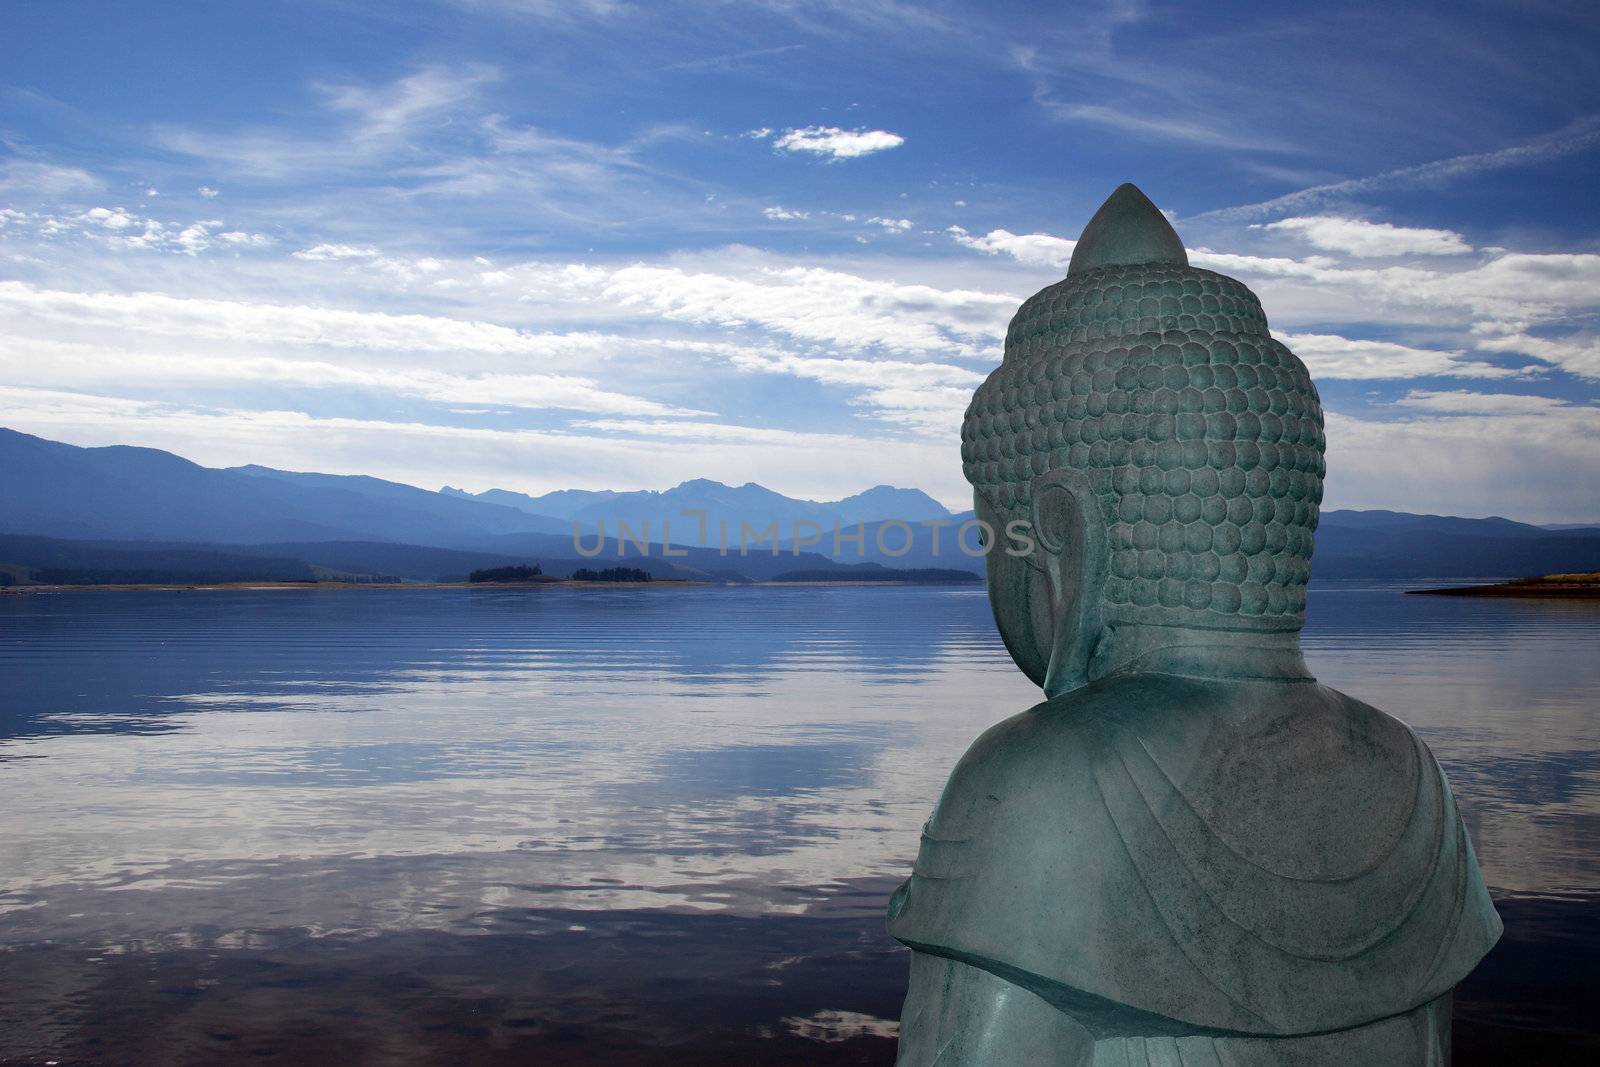 Backview of Buddha statue overlooking a peaceful mountain lake